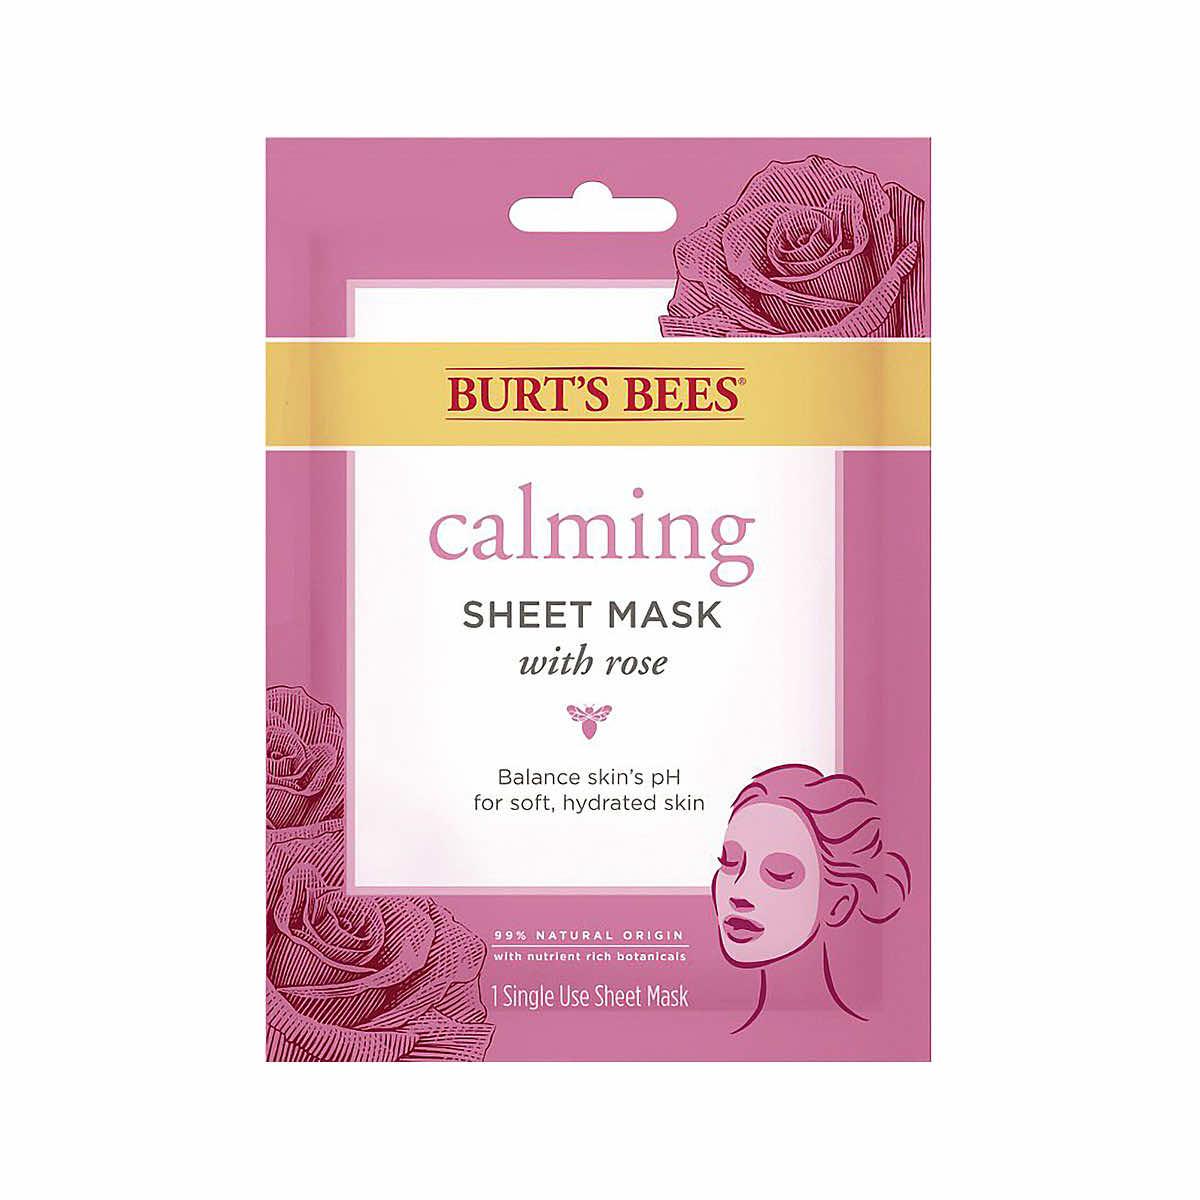  Calming Sheet Mask With Rose